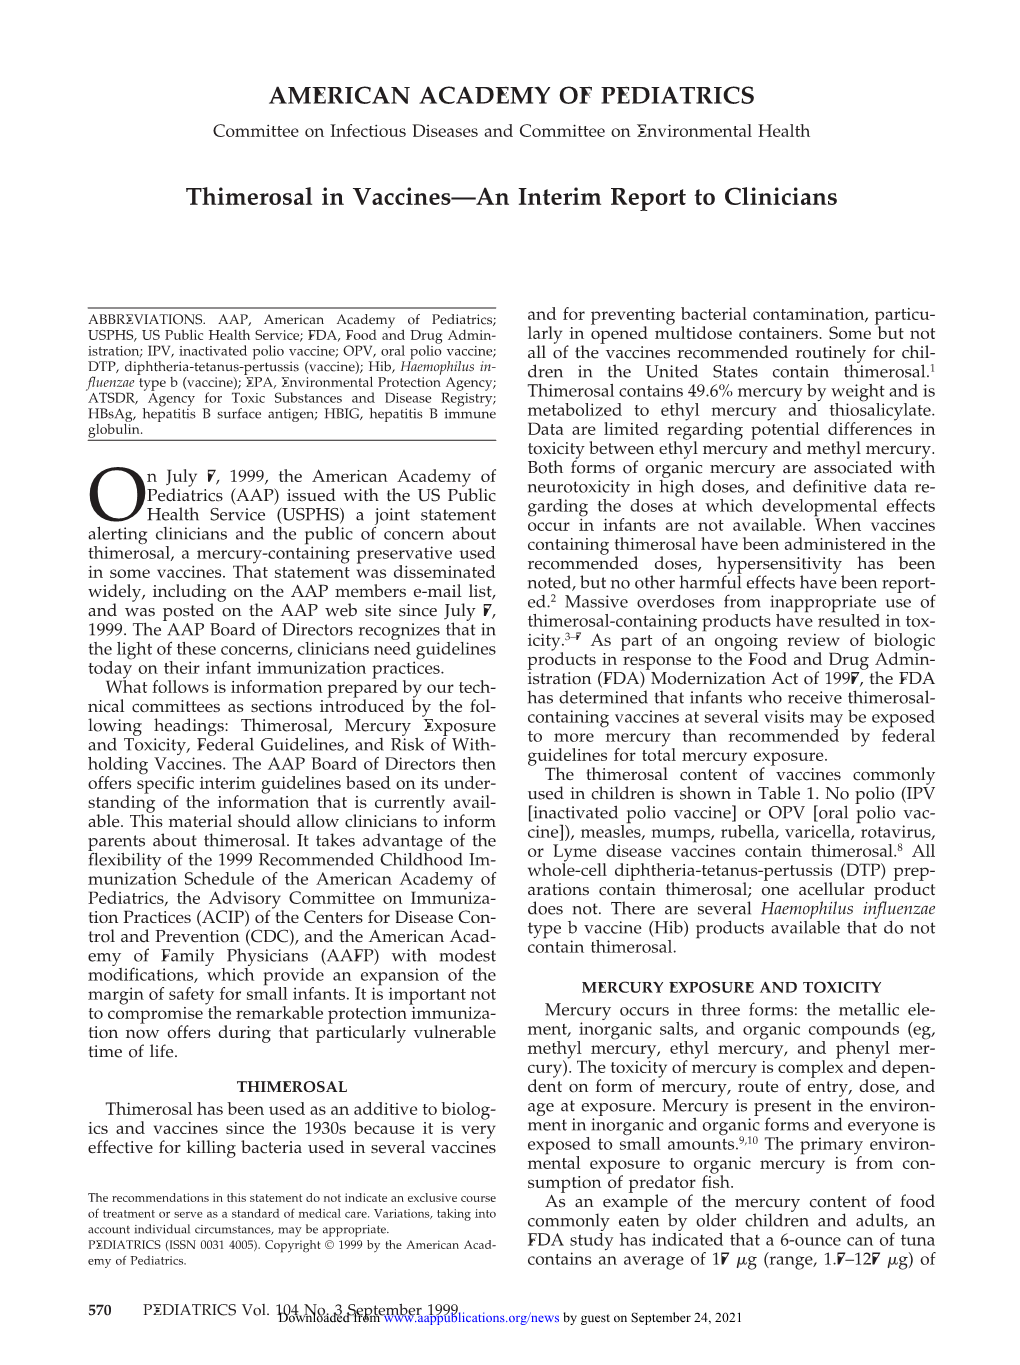 Thimerosal in Vaccines—An Interim Report to Clinicians